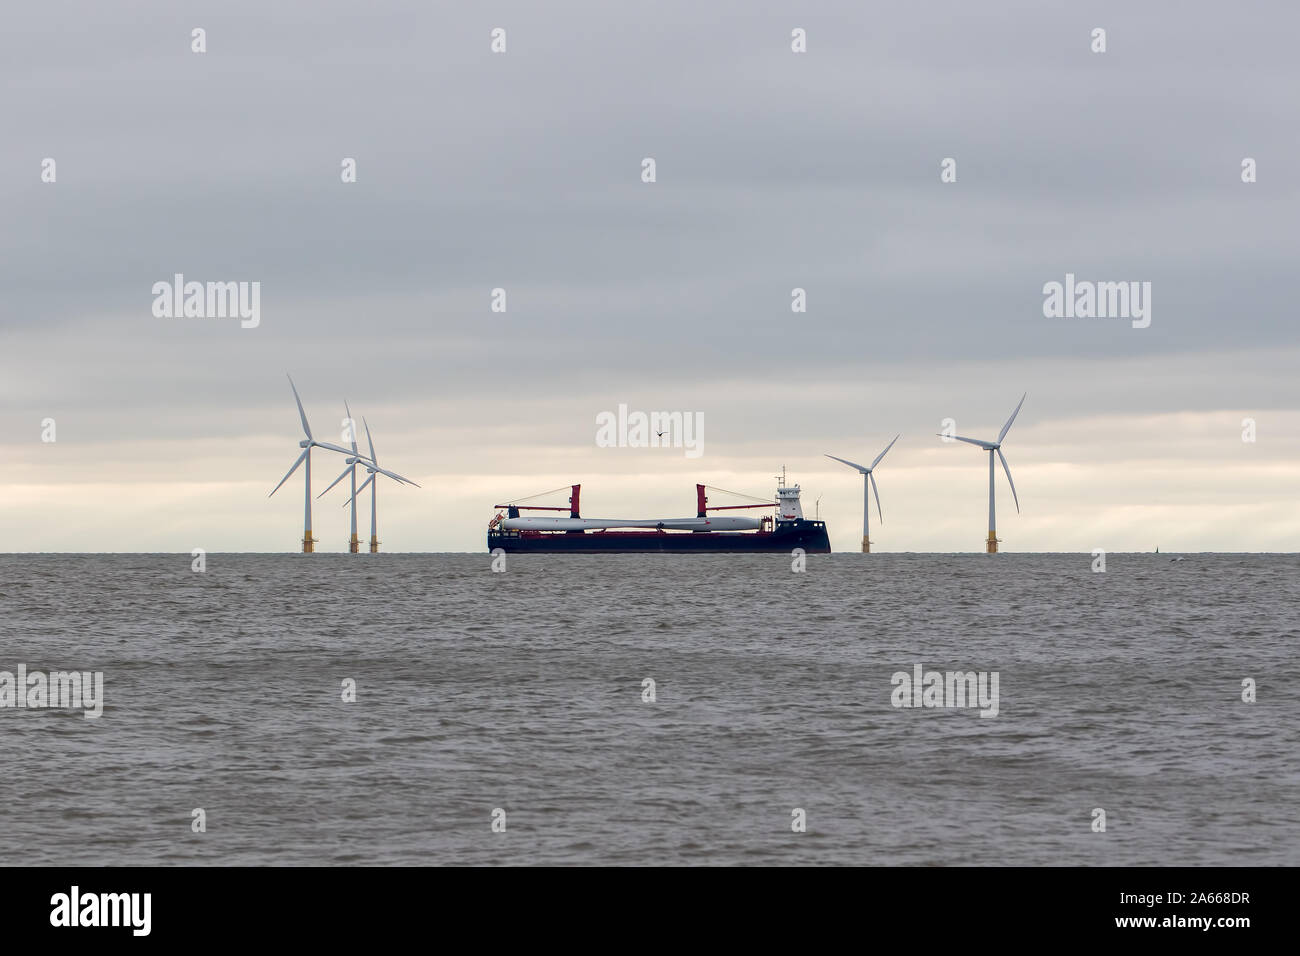 Wind turbine parts. Clean energy investment. Ship transporting blades via Scroby sands offshore wind farm Norfolk UK, a renewable green energy investm Stock Photo